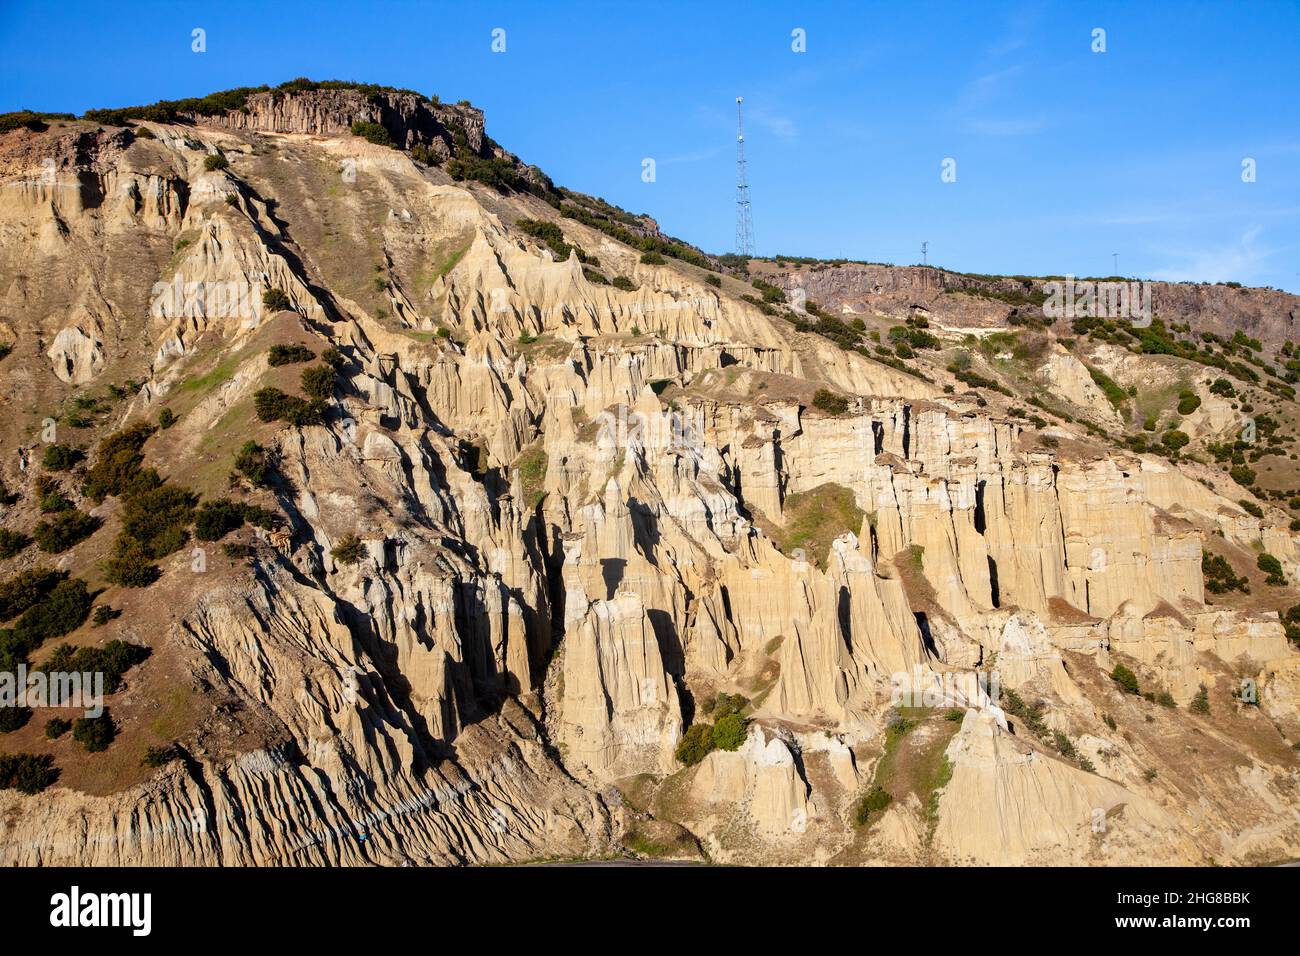 Volcanic rock patterns in the Kula district of Manisa Stock Photo